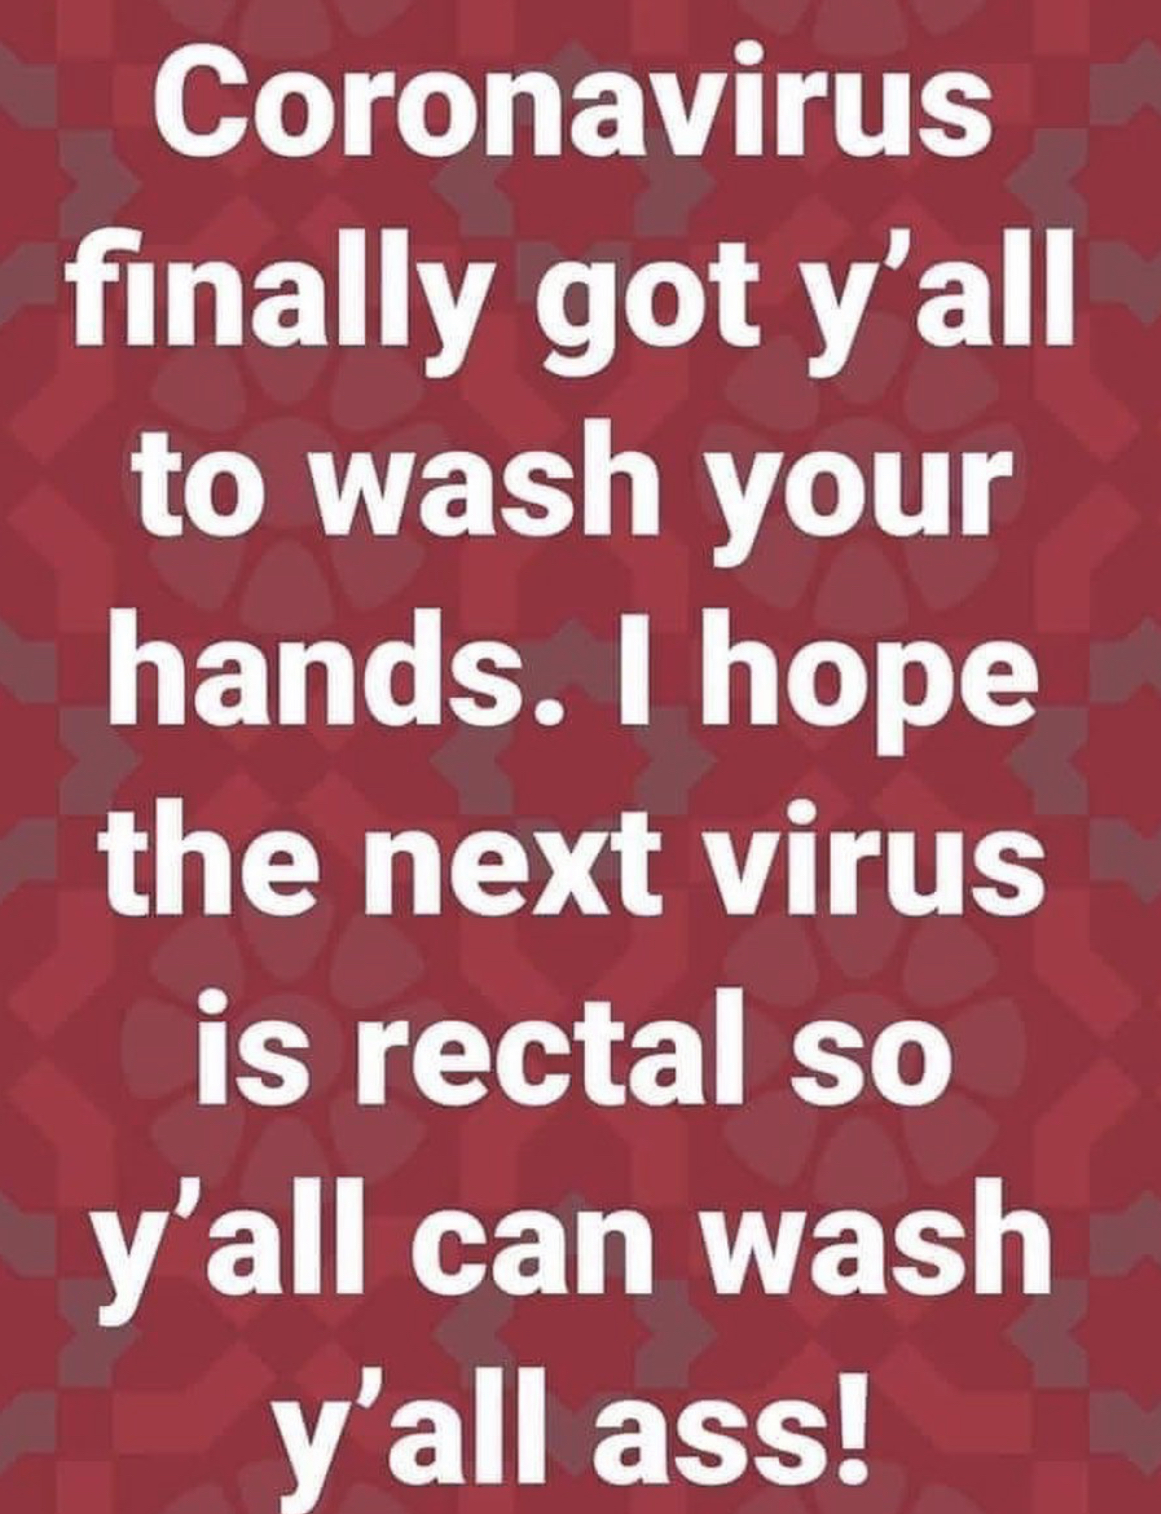 “Corona virus finally got y’all to wash your hands. I hope the next virus is rectal so y’all can wash yo ass!”